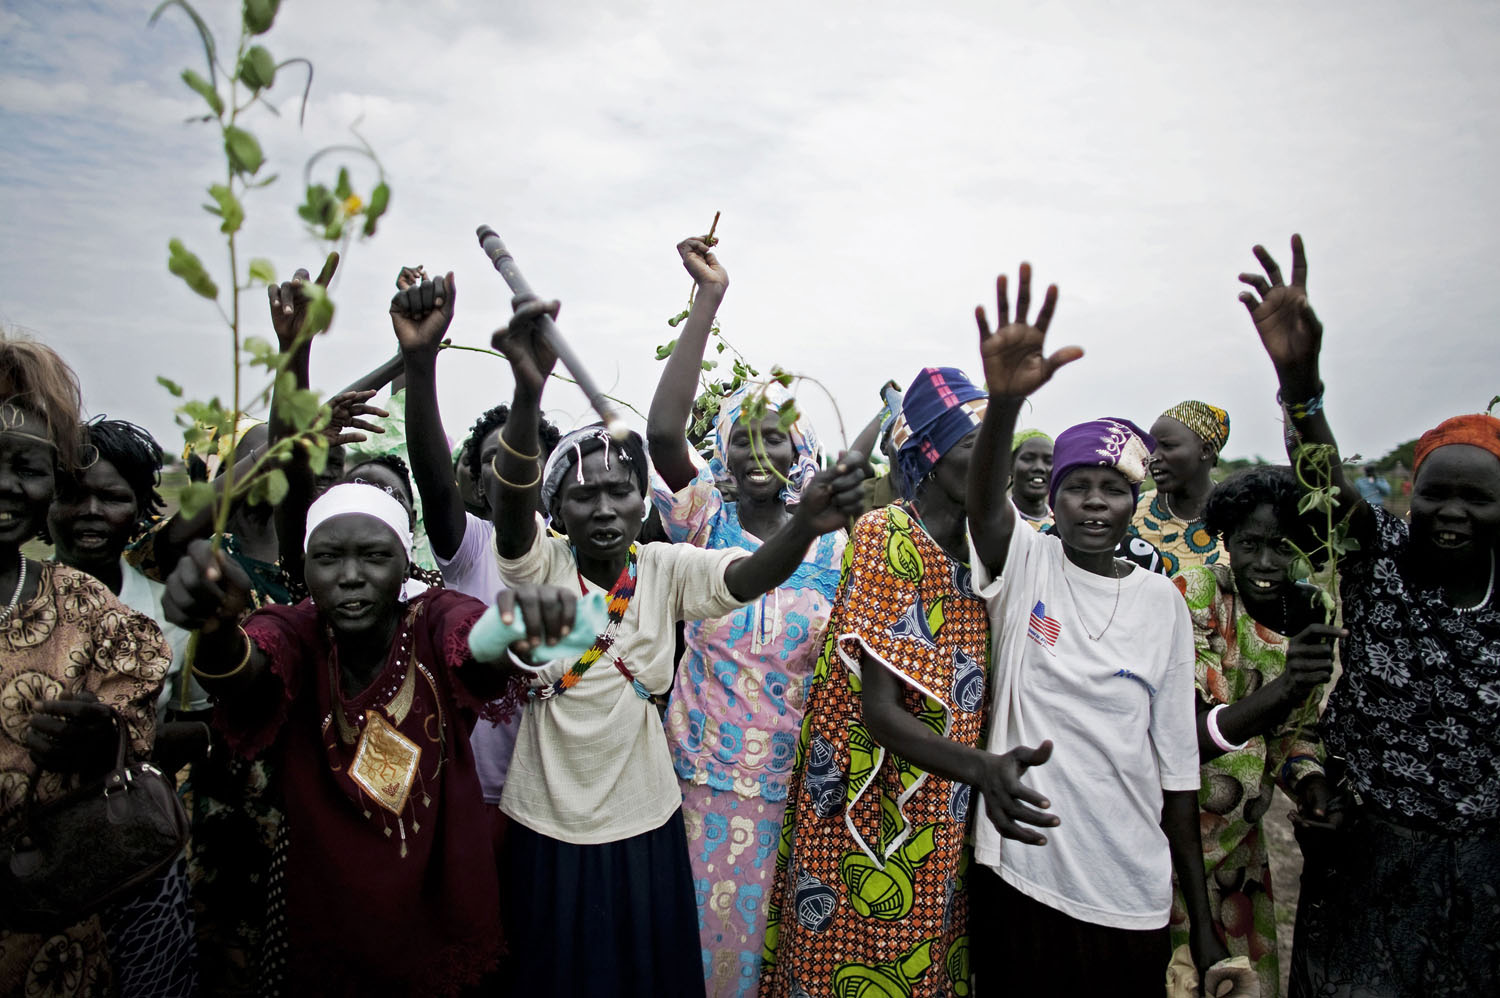 Nuer tribeswomen in the remote town of Akobo, near the border with Ethiopia. Akobo has been devastated by intertribal fighting since the end of the civil war in 2005.